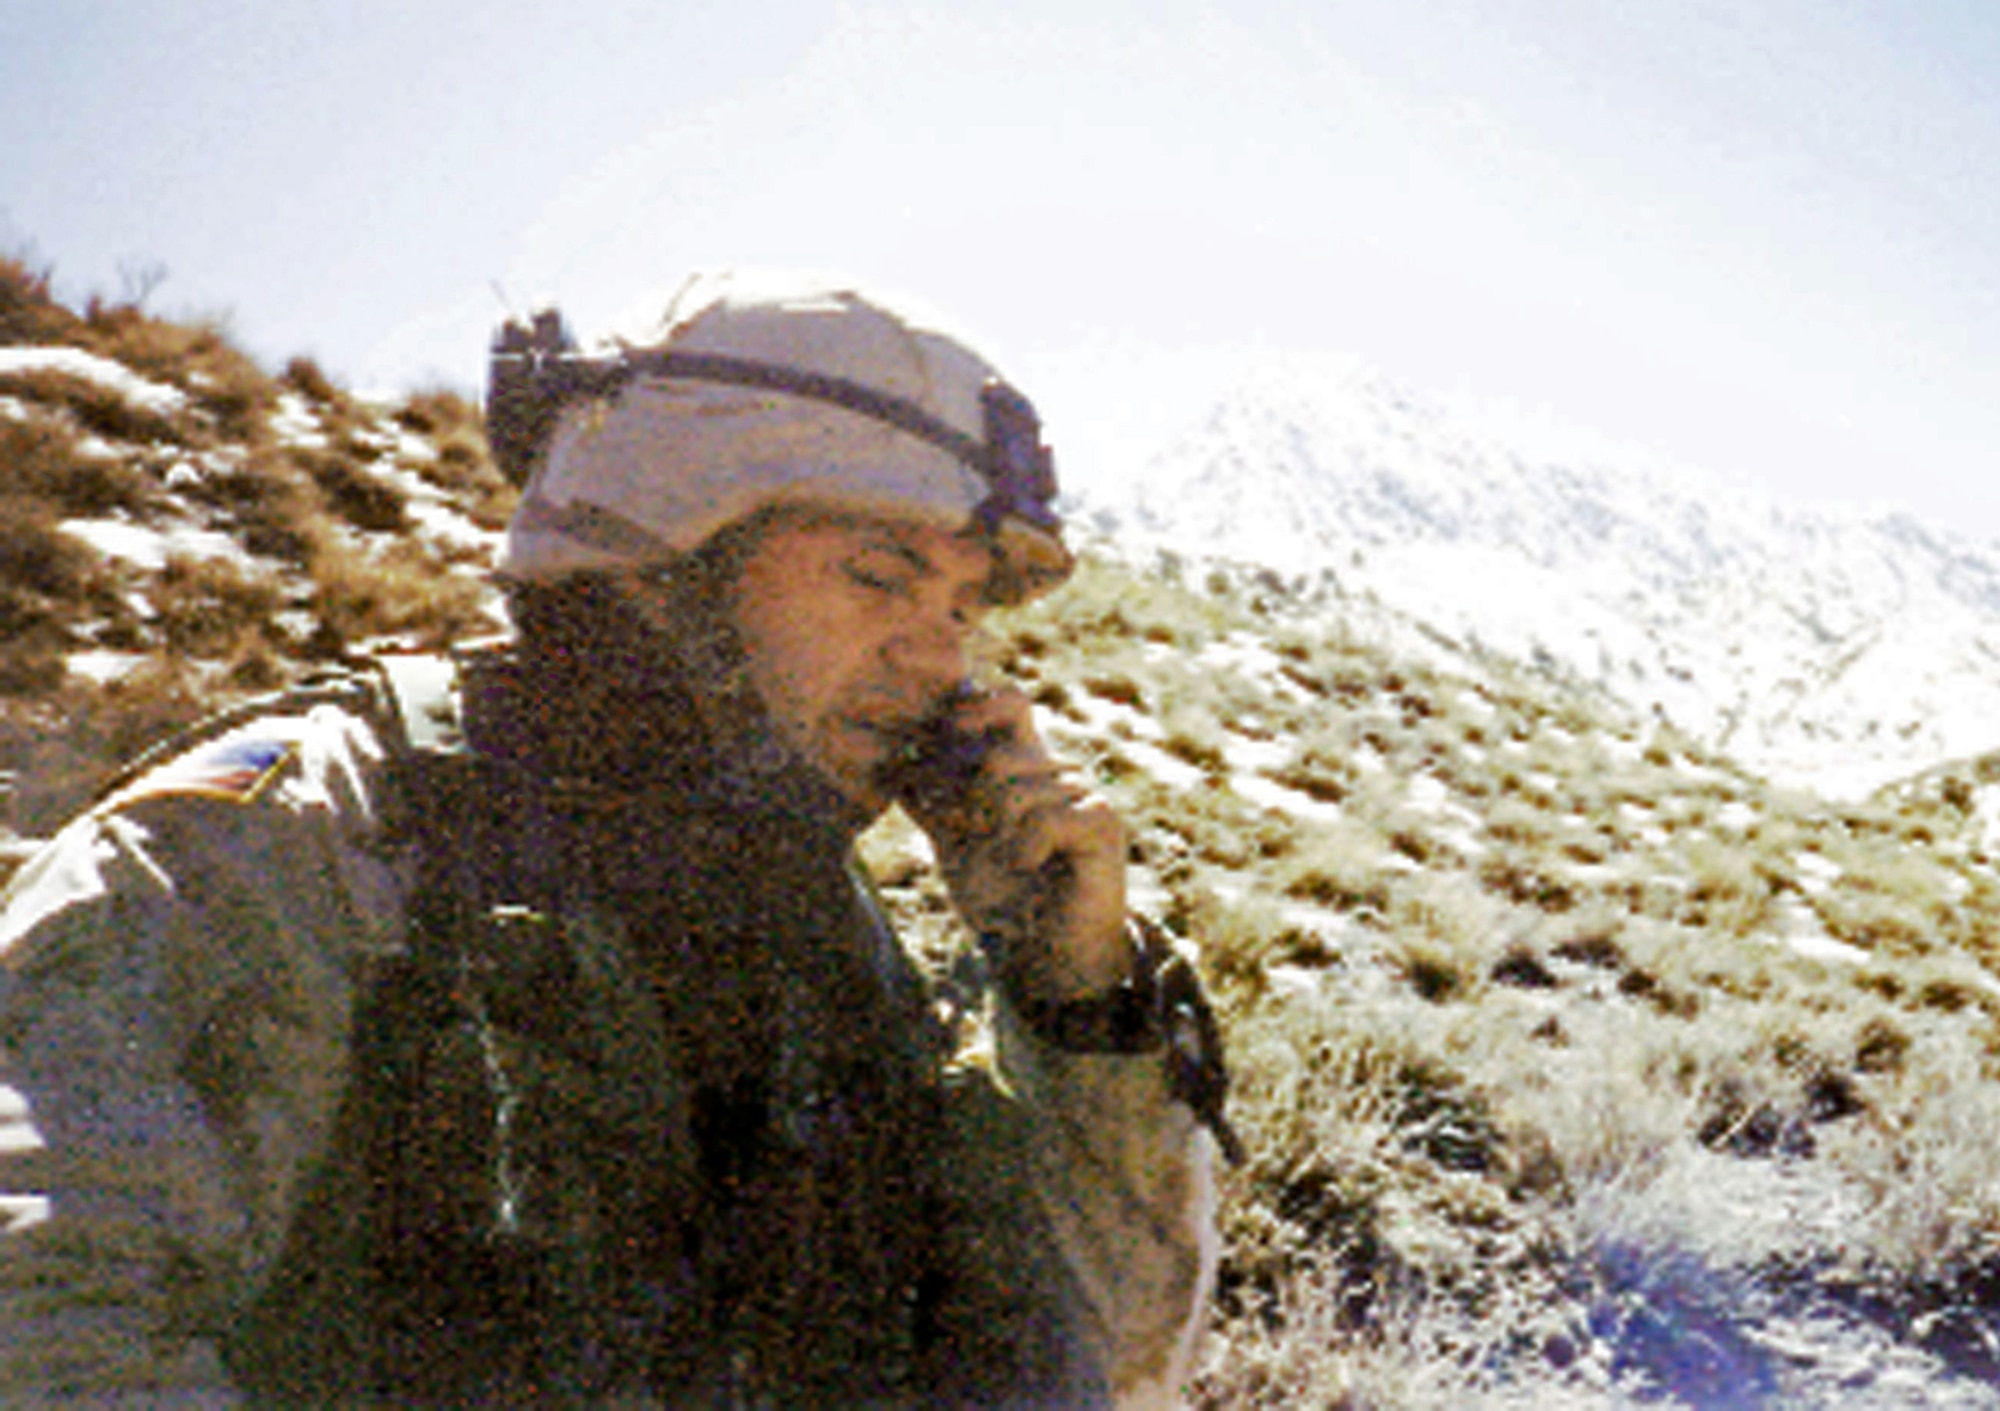 In this photo taken under extreme conditions in Afghanistan, Tech. Sgt. Stephen Achey talks to military officials while assigned to Bagram Air Base in 2002. Sergeant Achey was awarded the Silver Star for his actions in Afghanistan and received the Keeper of the Flame Award from the chairman of the Joint Chiefs of Staff Sept. 20 for his efforts in fighting the war on terrorism. (Courtesy photo)